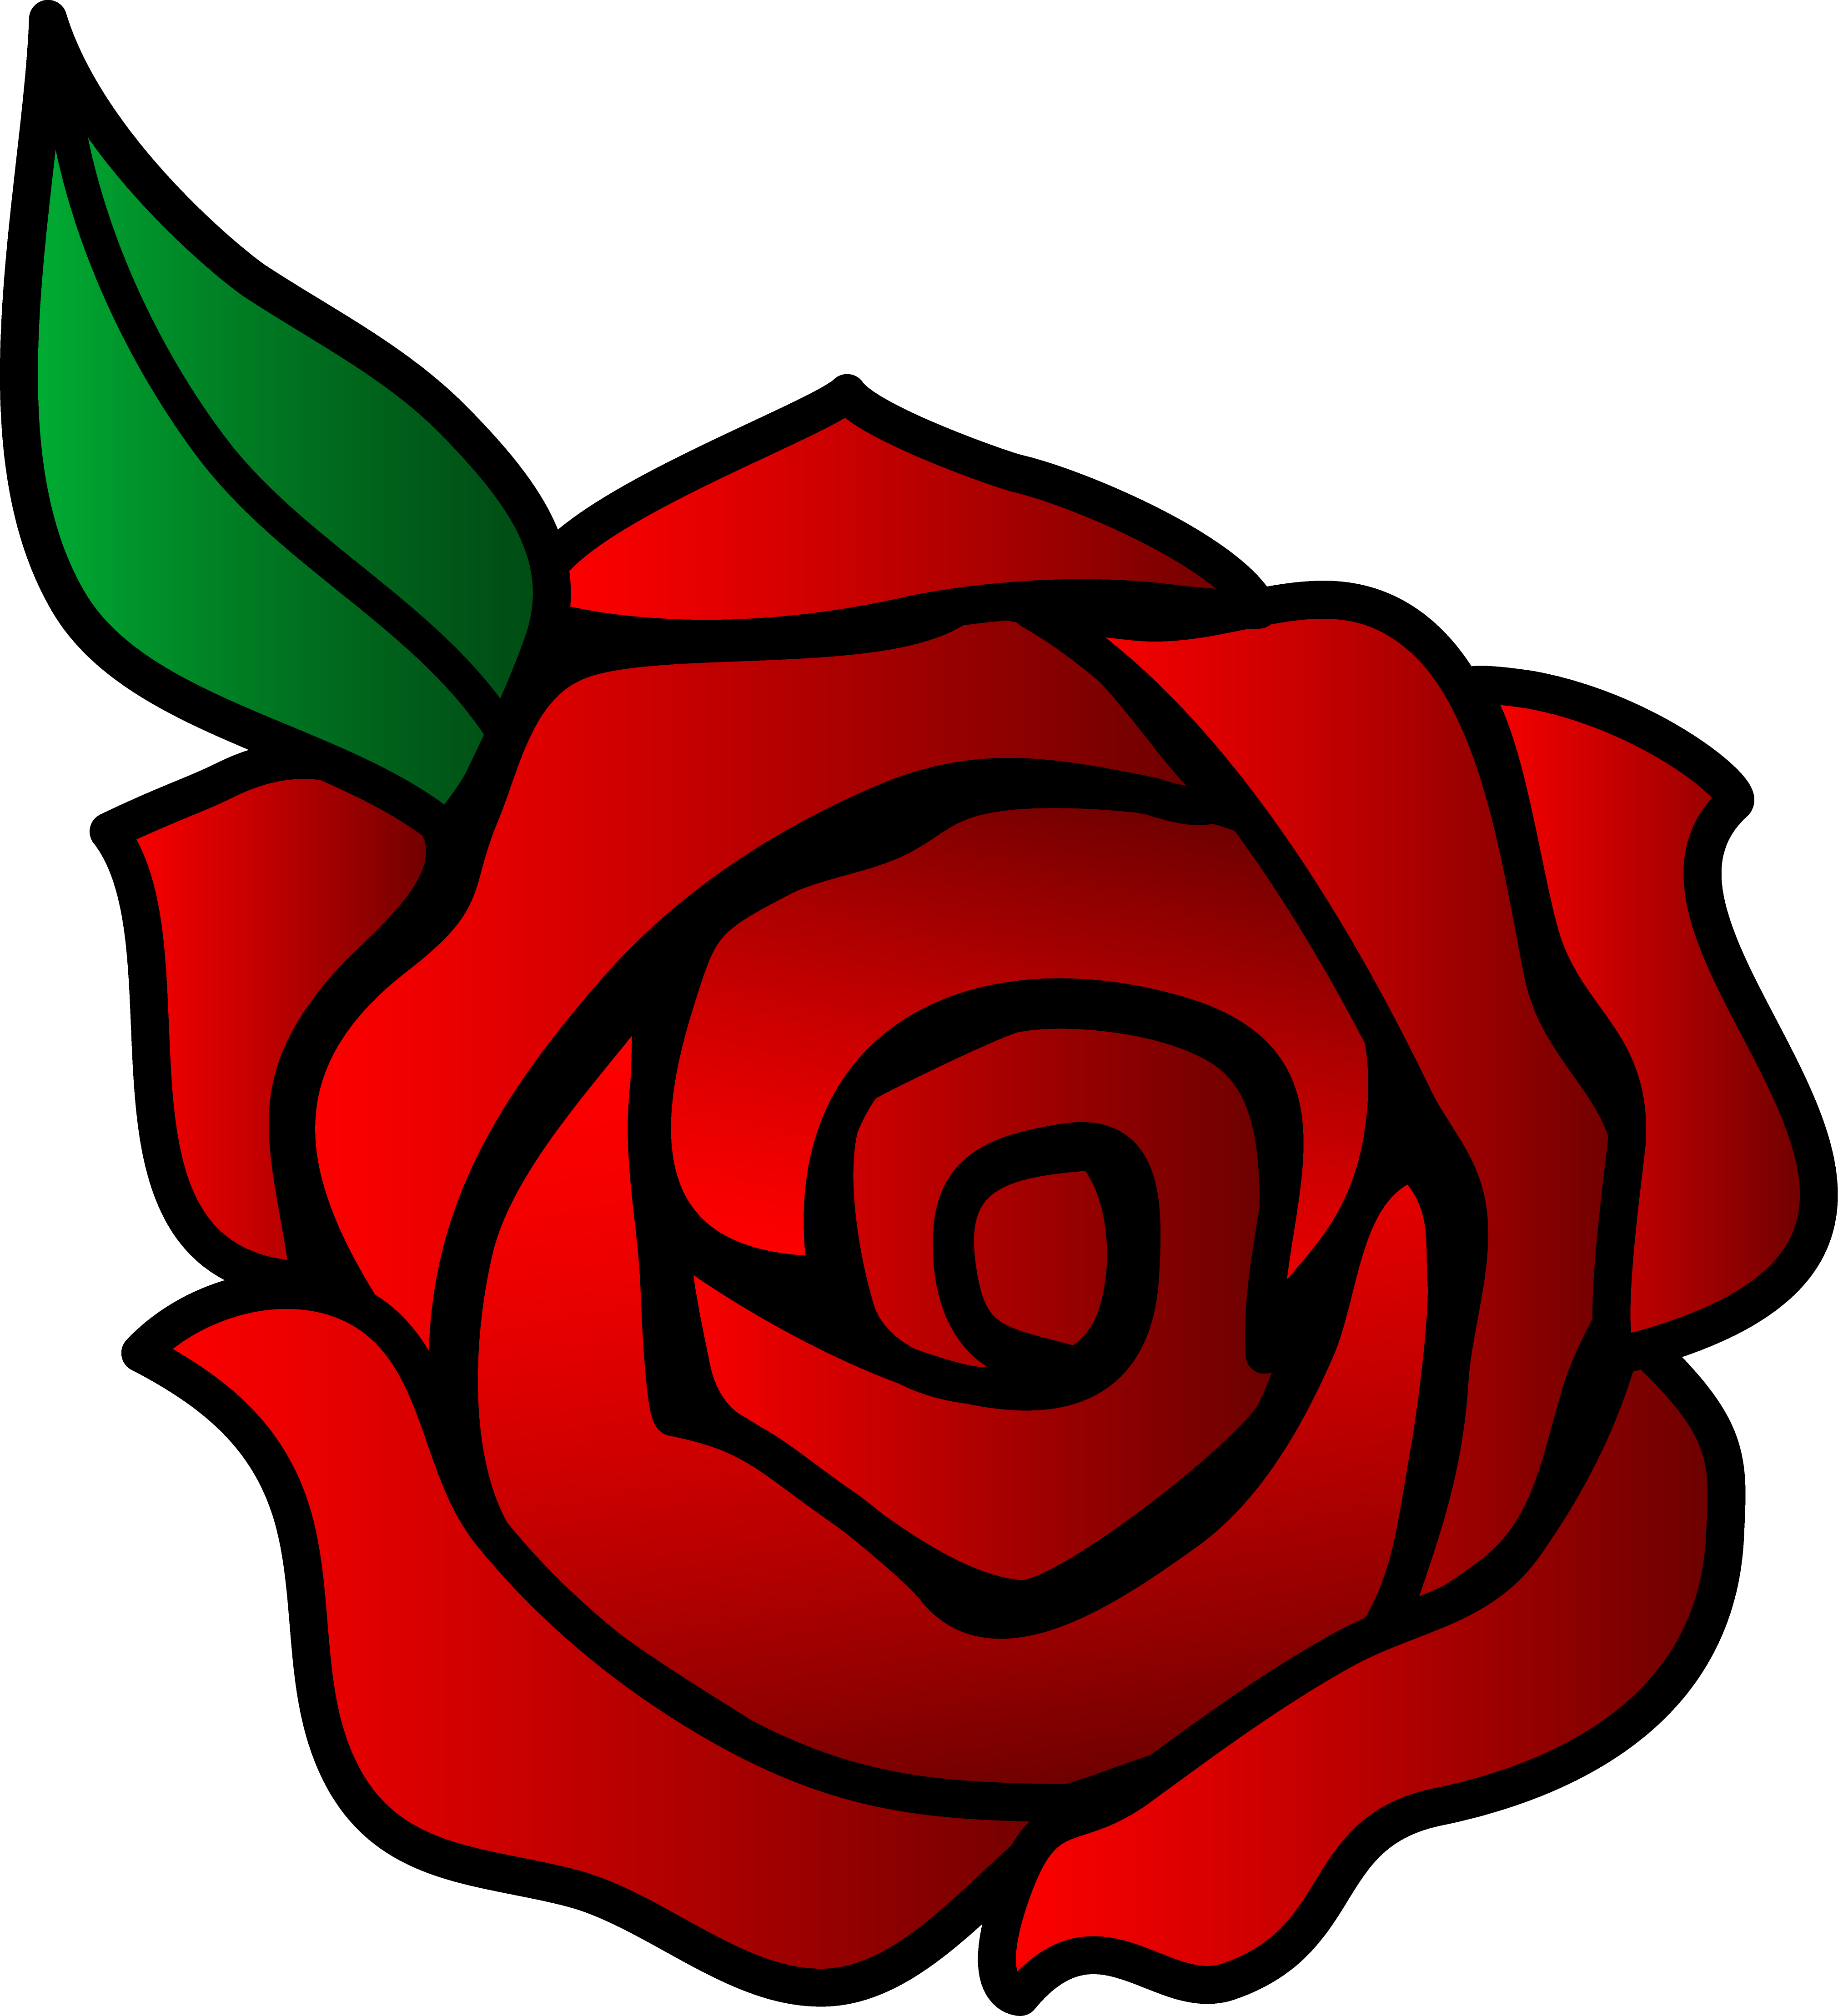 Simple Red Rose Drawing - Gallery